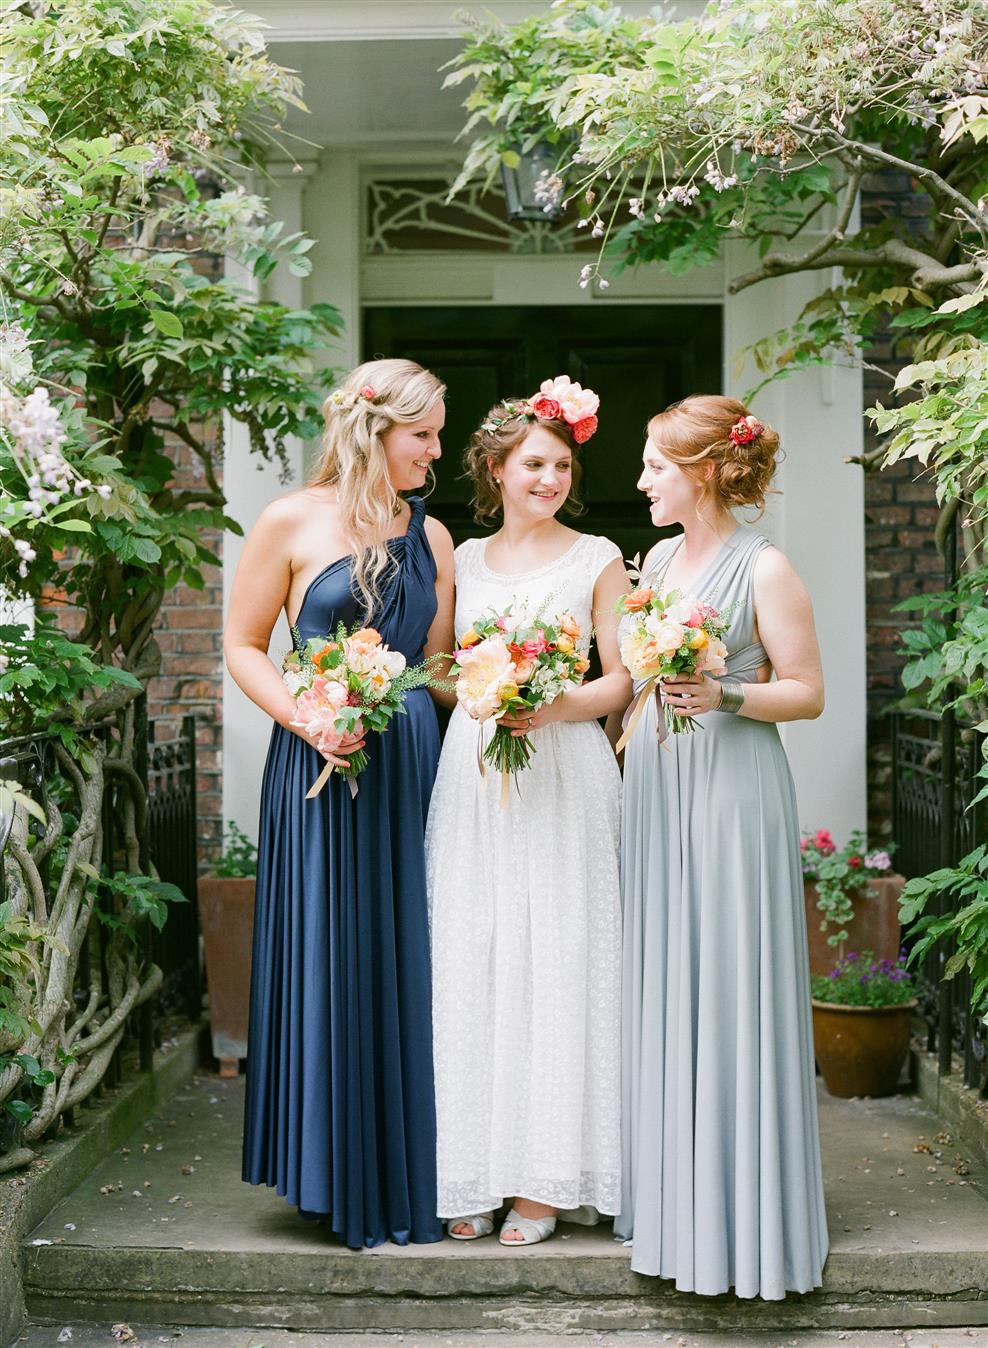 Bridesmaids - A 1940s Wedding Dress for a Sweet Spring Wedding from Taylor & Porter Photography